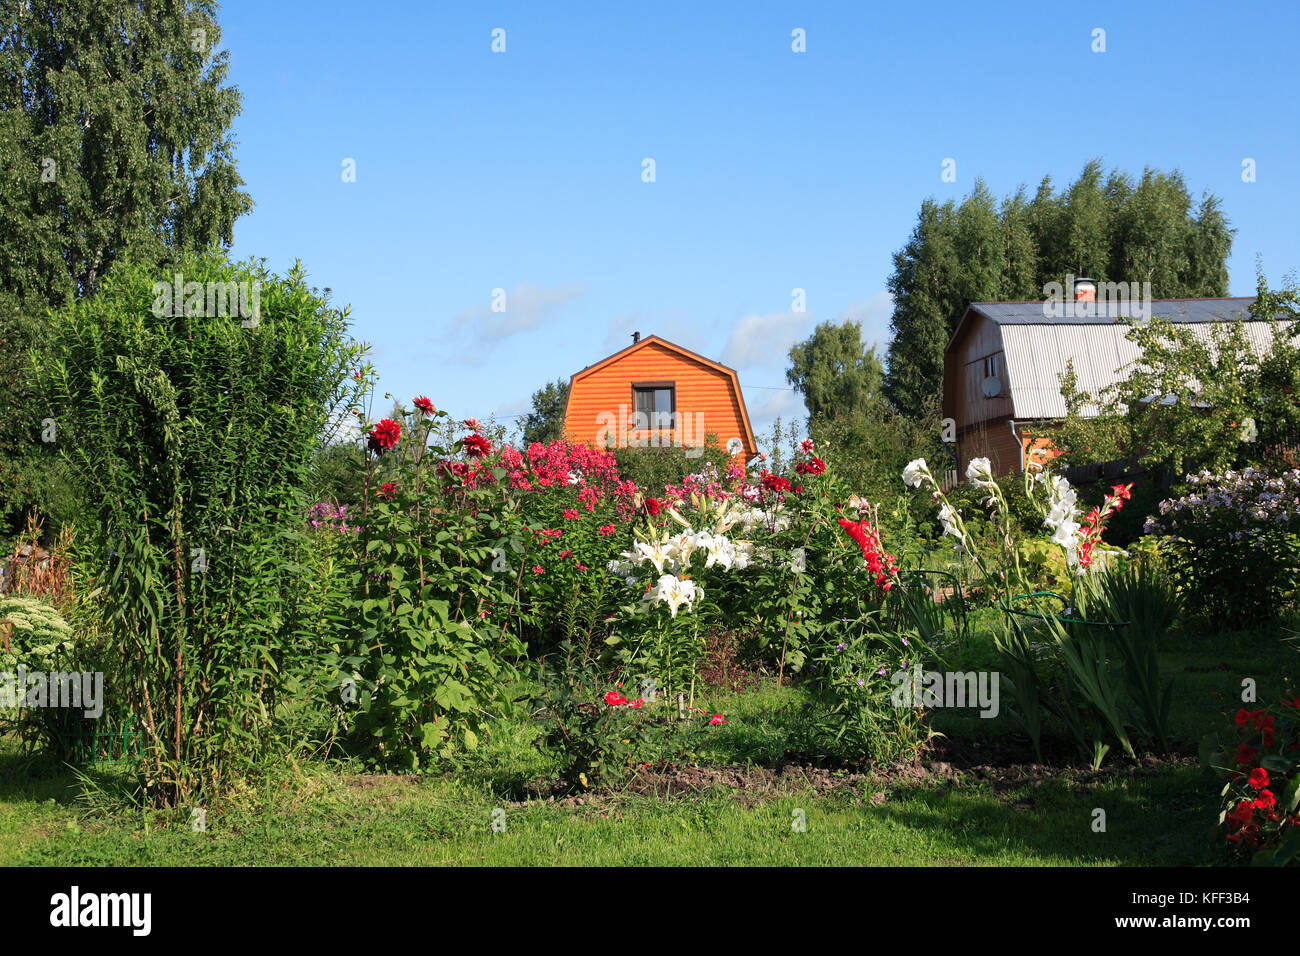 View of wooden country house on background with plants and flowers Stock Photo